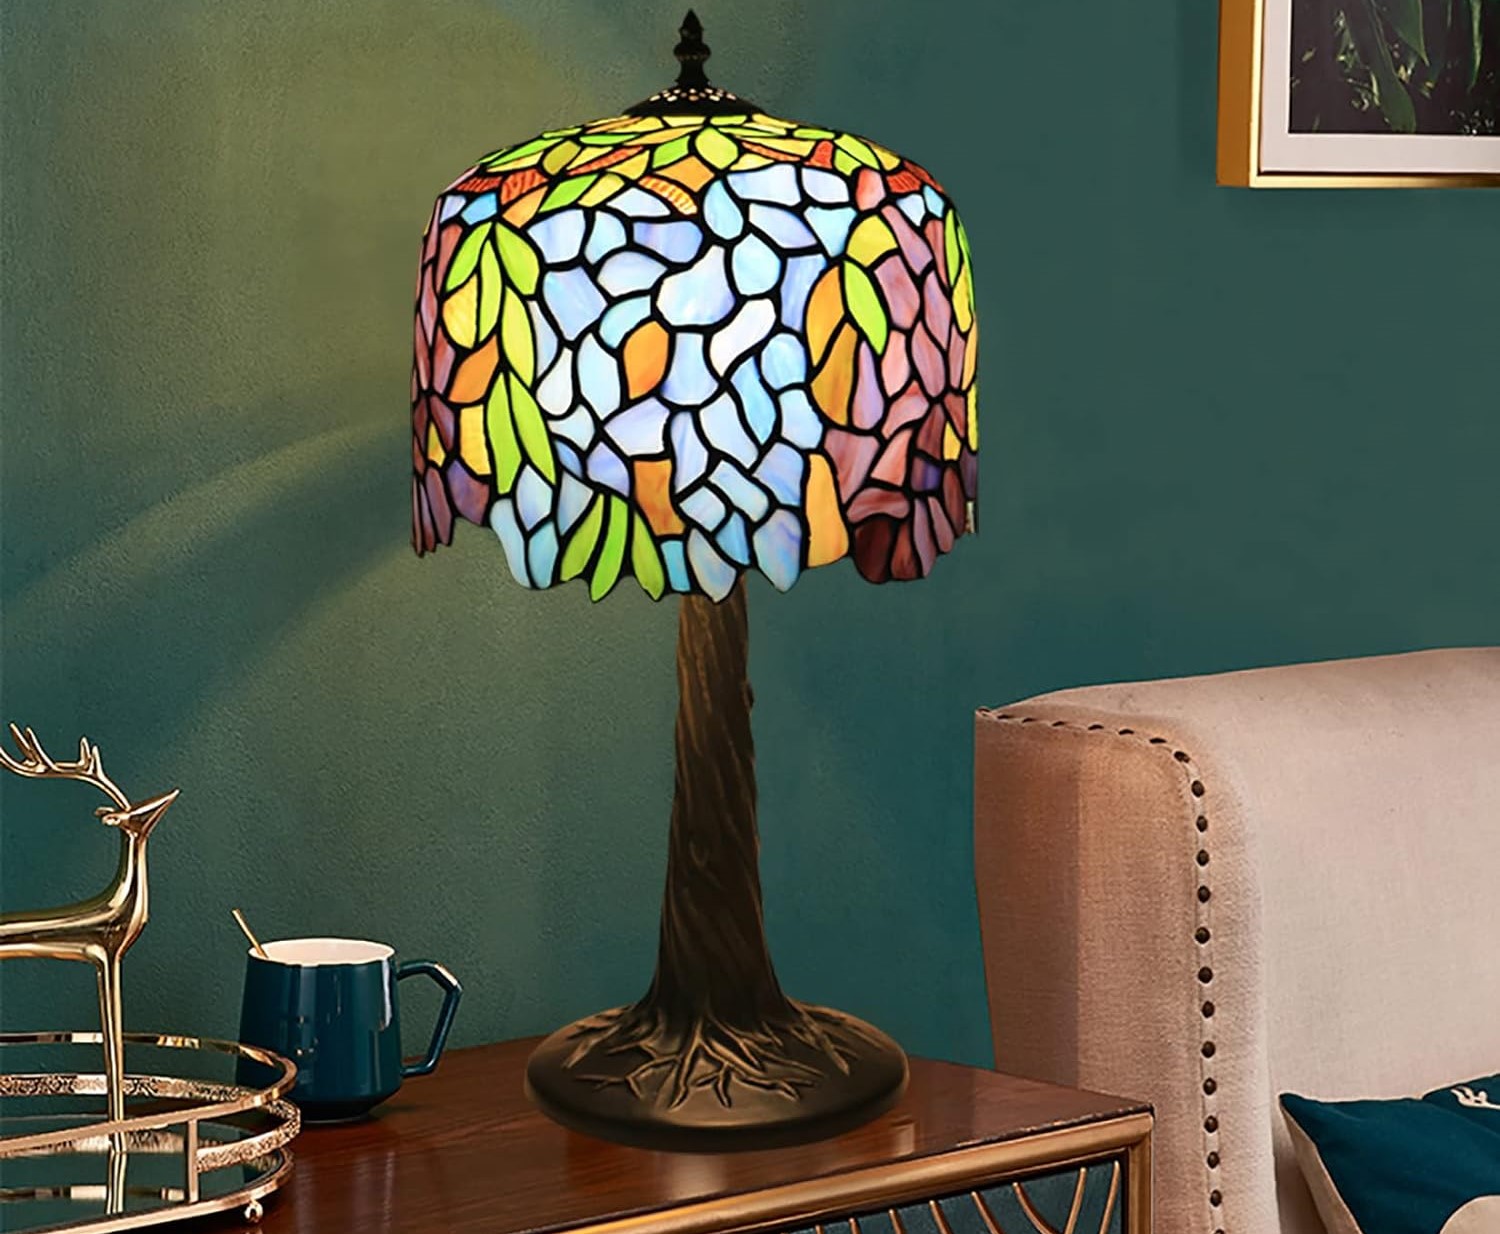 Wisteria Table Lamp: What Design Style?